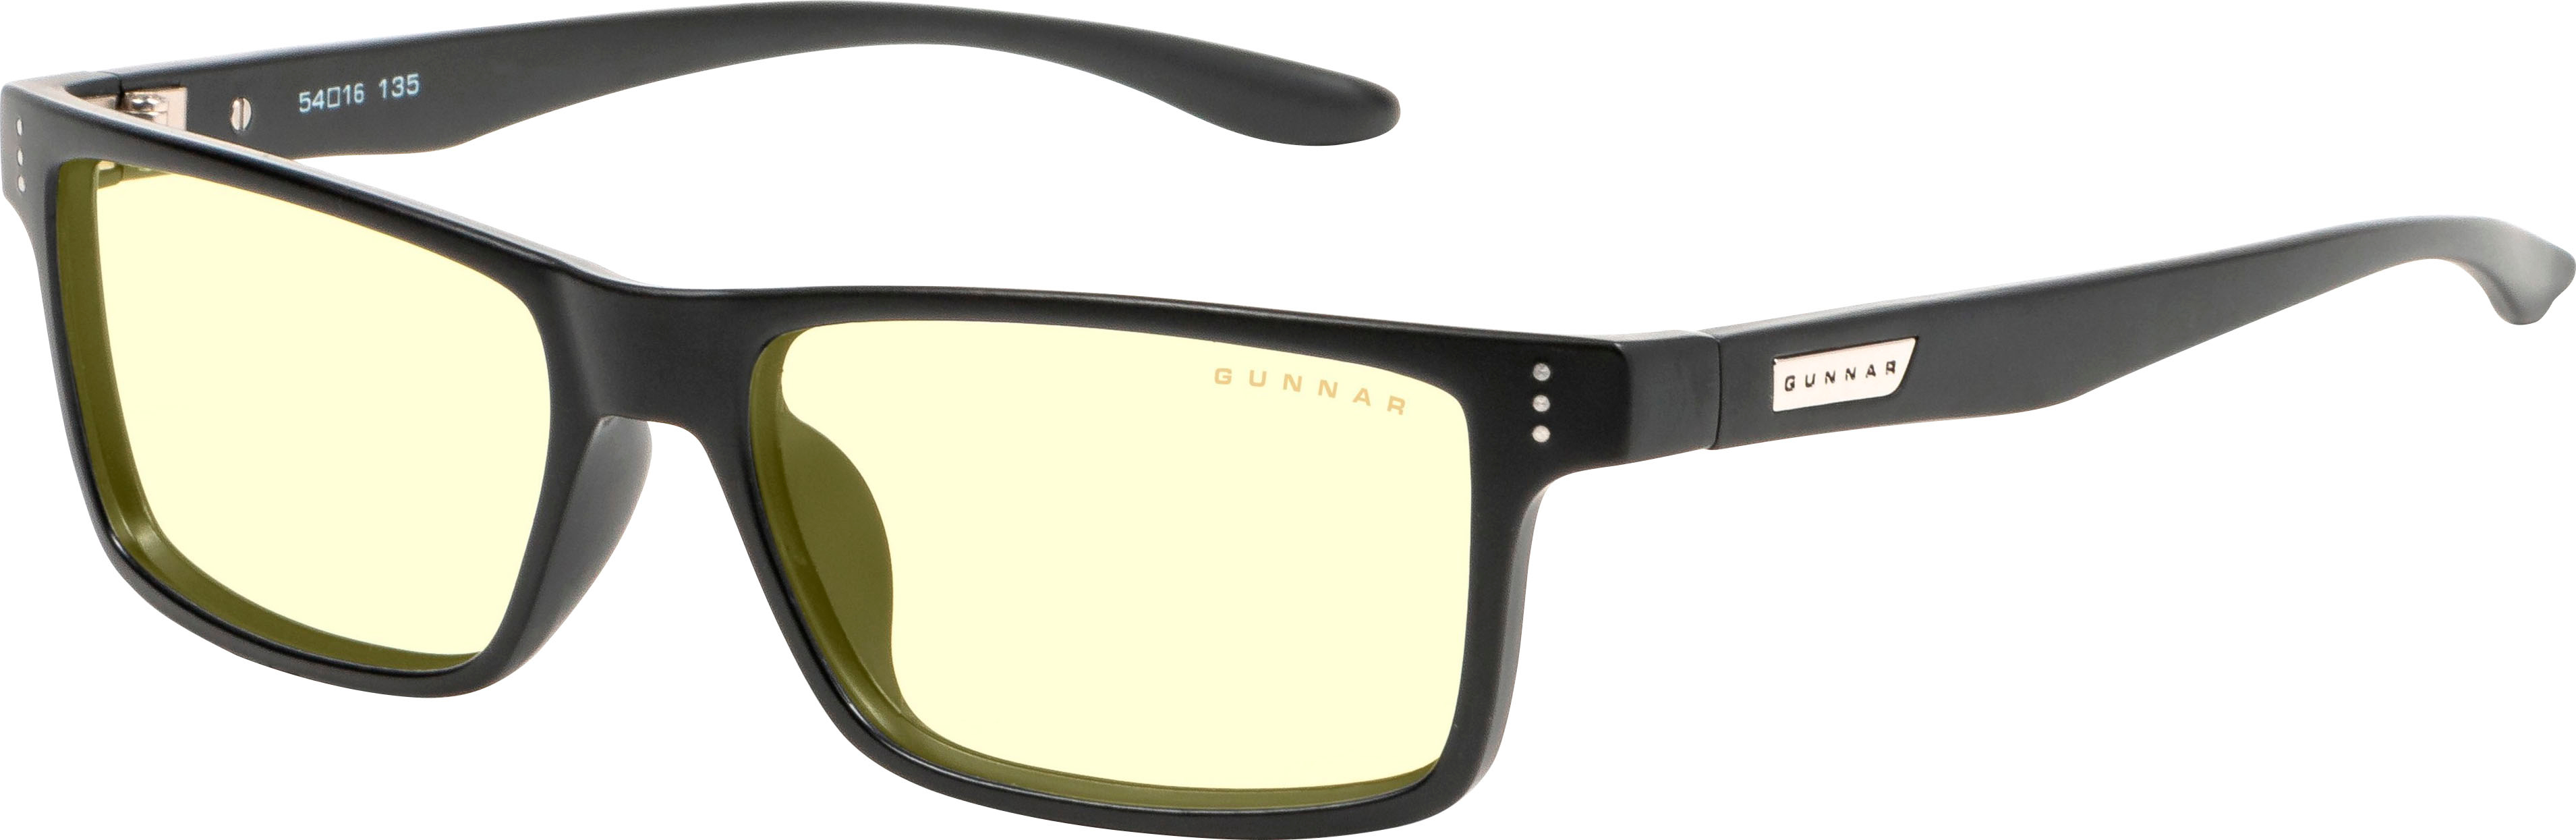 GUNNAR - Vertex Gaming Glasses with Ultraviolet (UV) Light Protection and Blue Light Reduction, Amber Lenses - Onyx